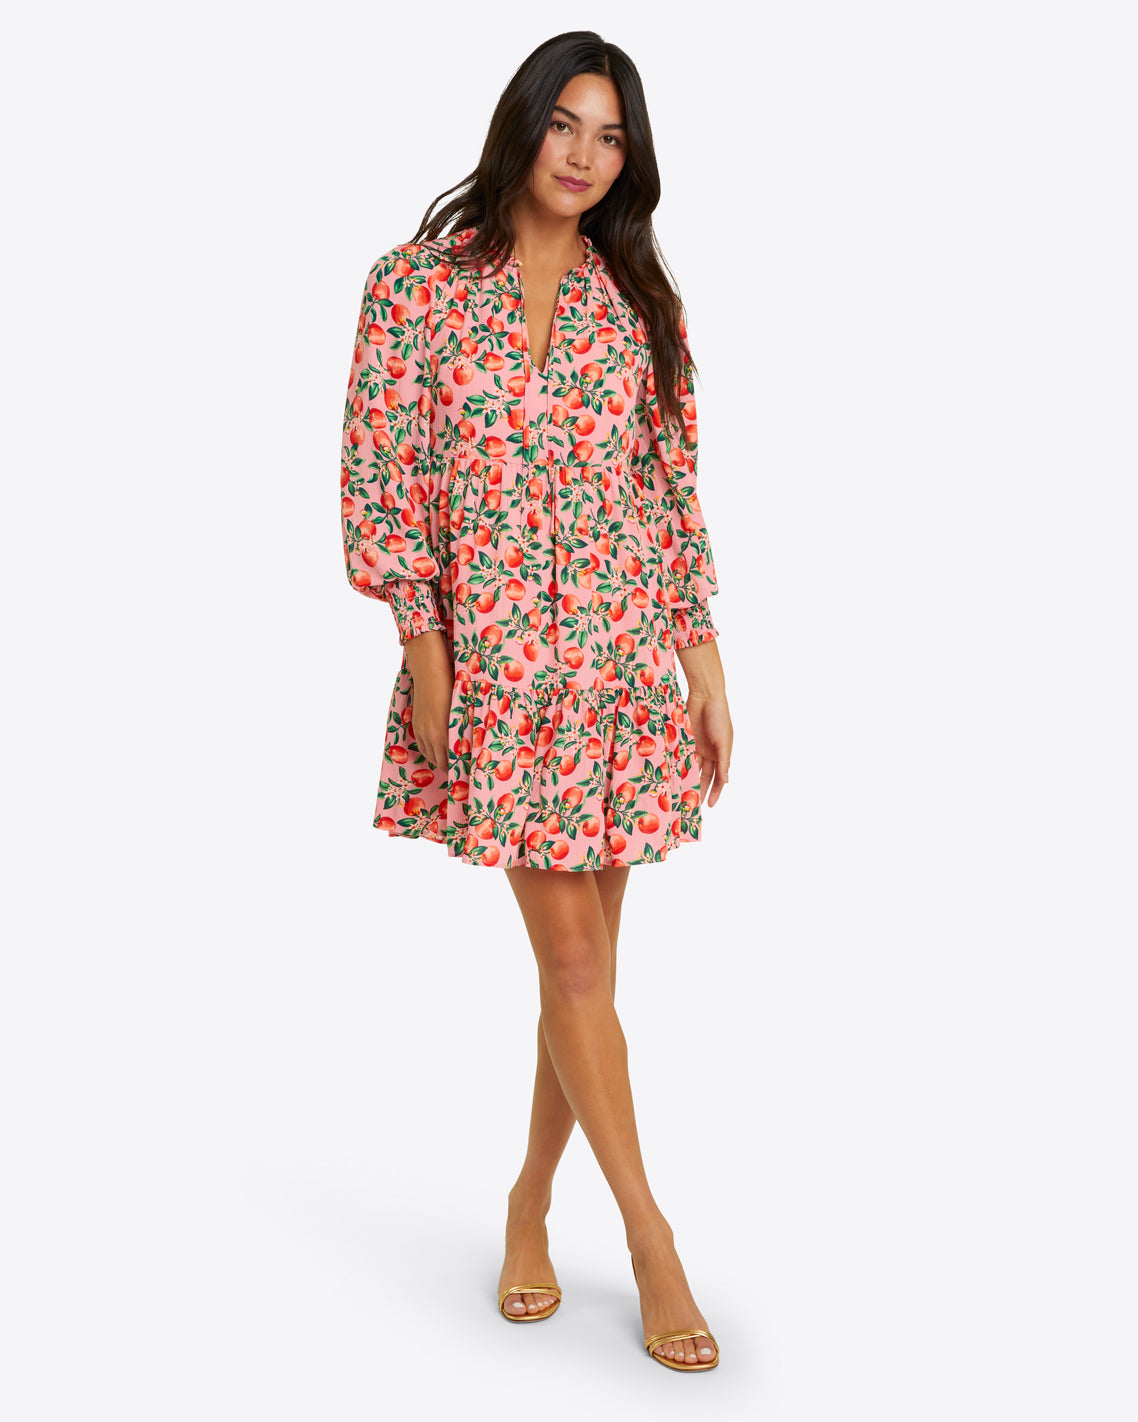 Connie Long Sleeve Mini Dress in Apple Blossom Floral – Draper James